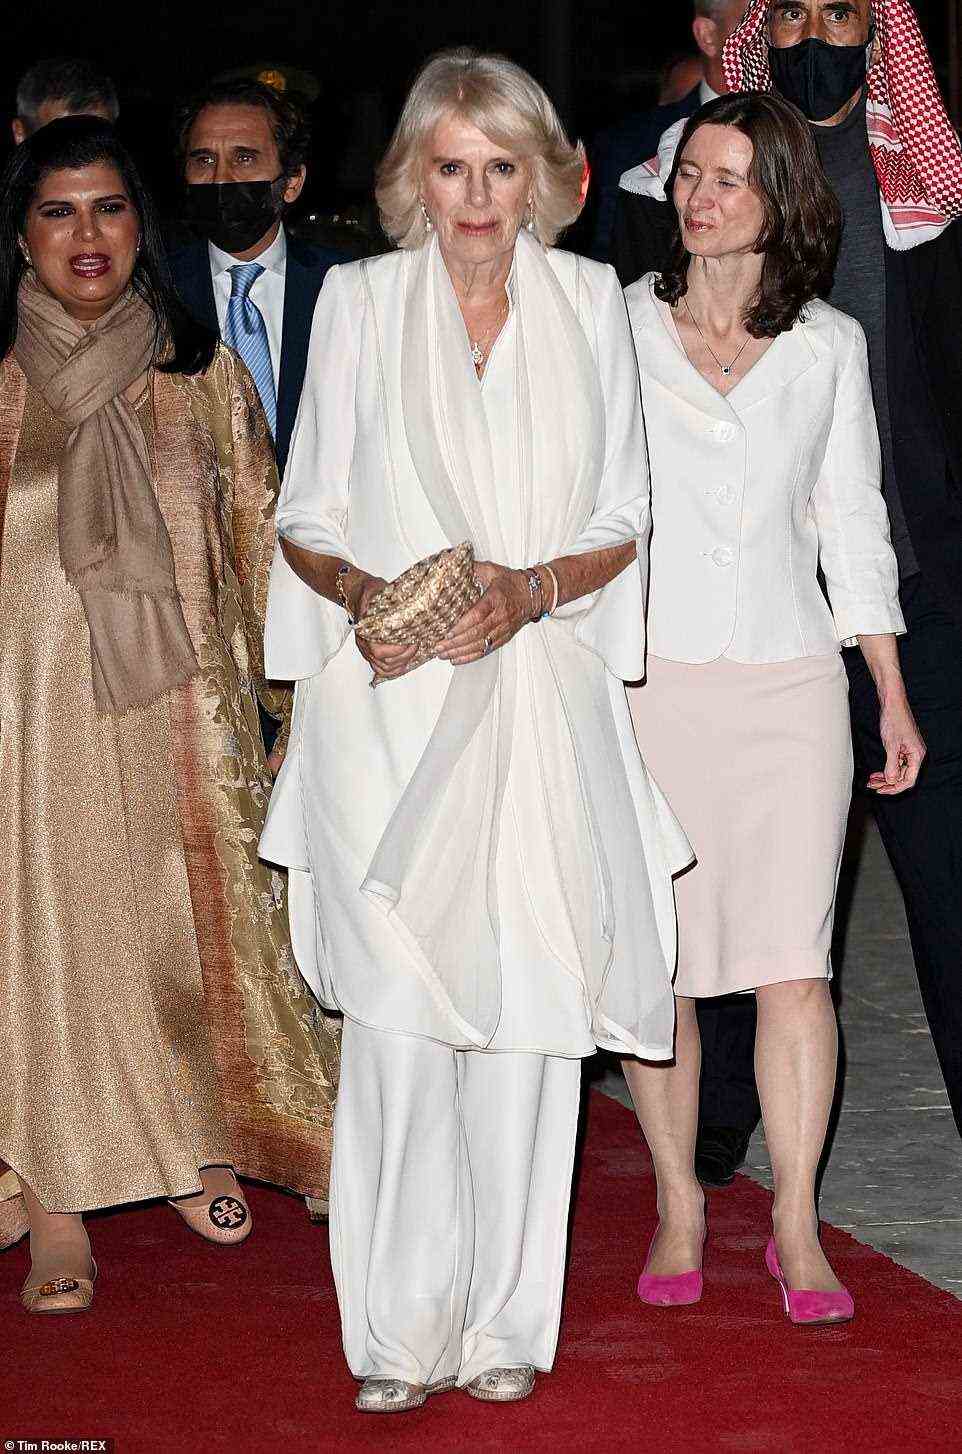 Camilla made a stylish entrance tonight with an all-white ensemble. The evening will culminate with the couple viewing the Dead Sea scrolls exhibit